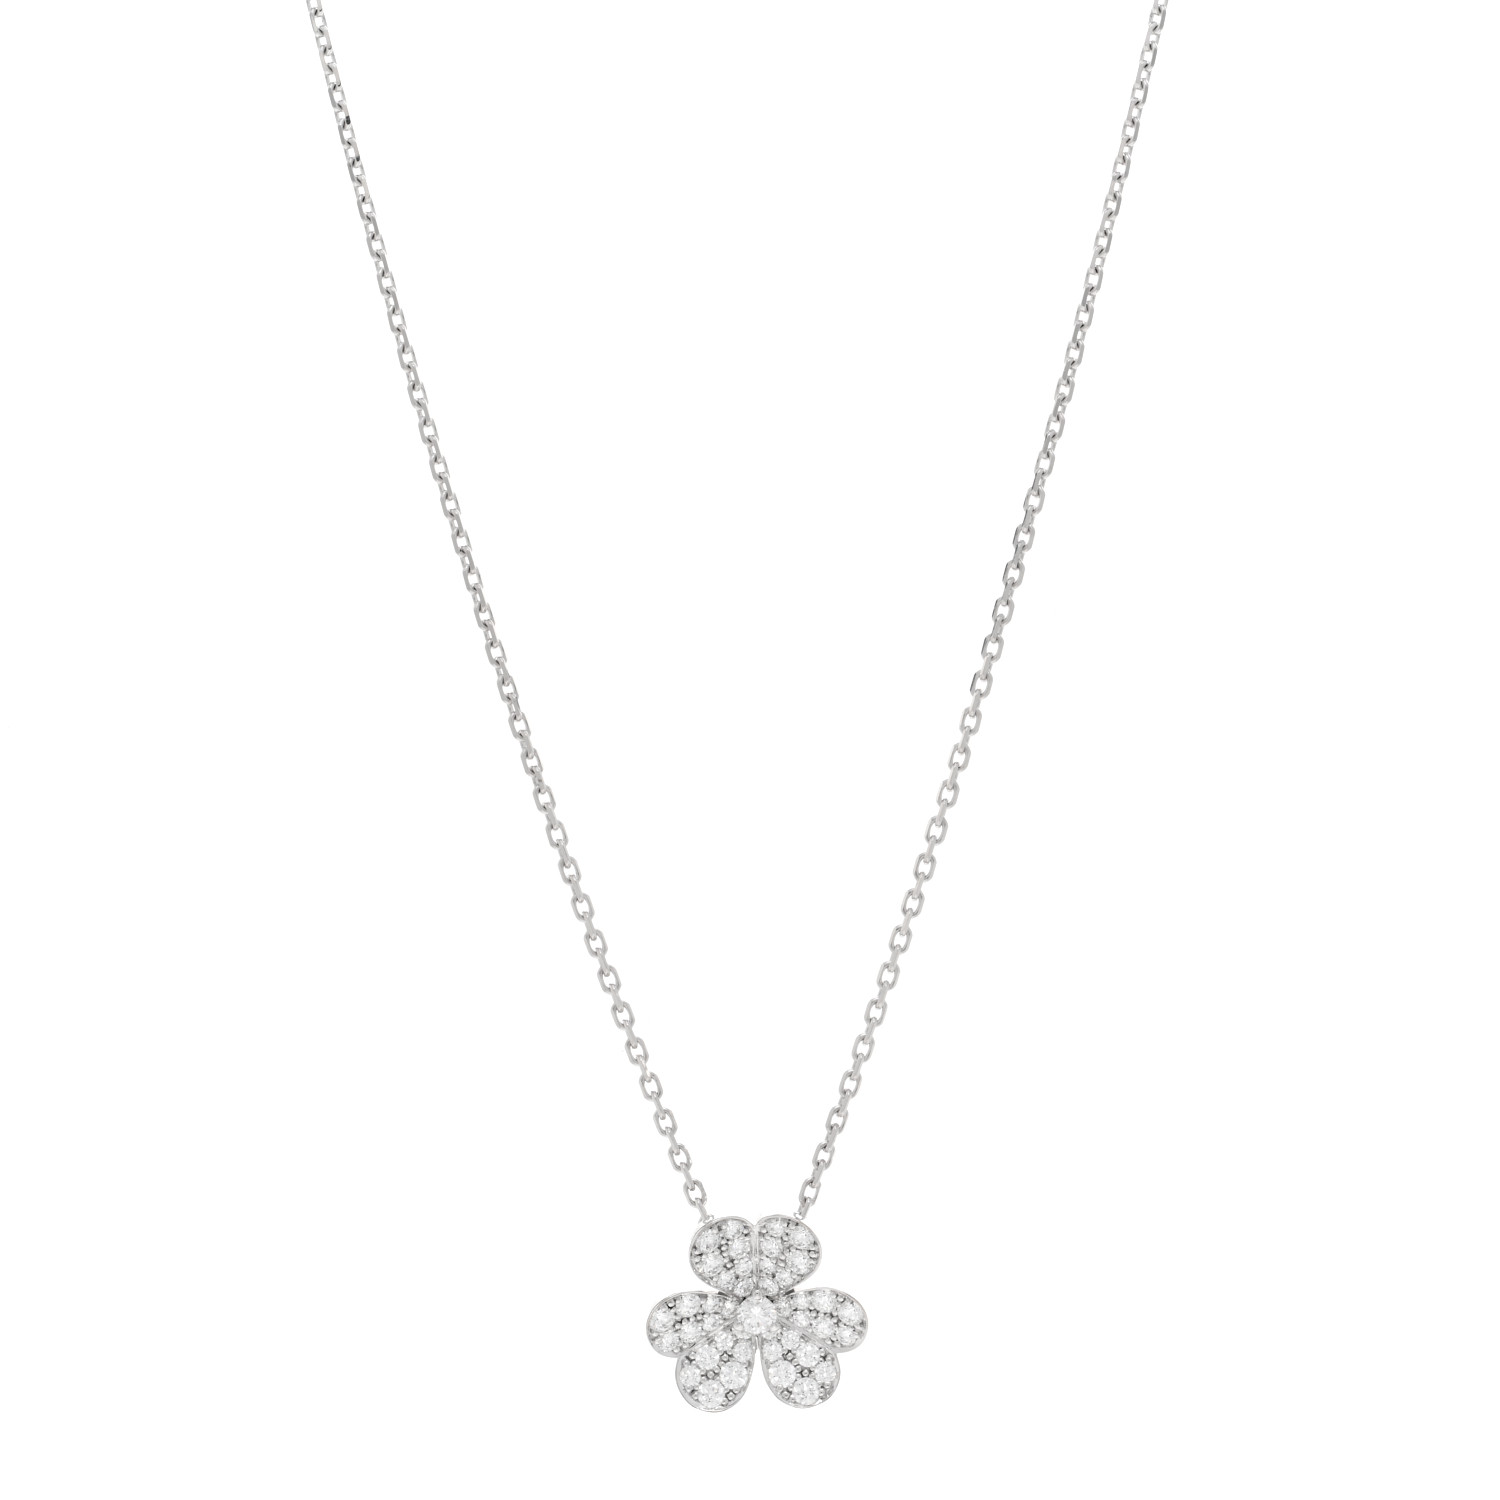 VAN CLEEF & ARPELS 18K White Gold Diamond Small Frivole Pendant Necklace by FASHIONPHILE